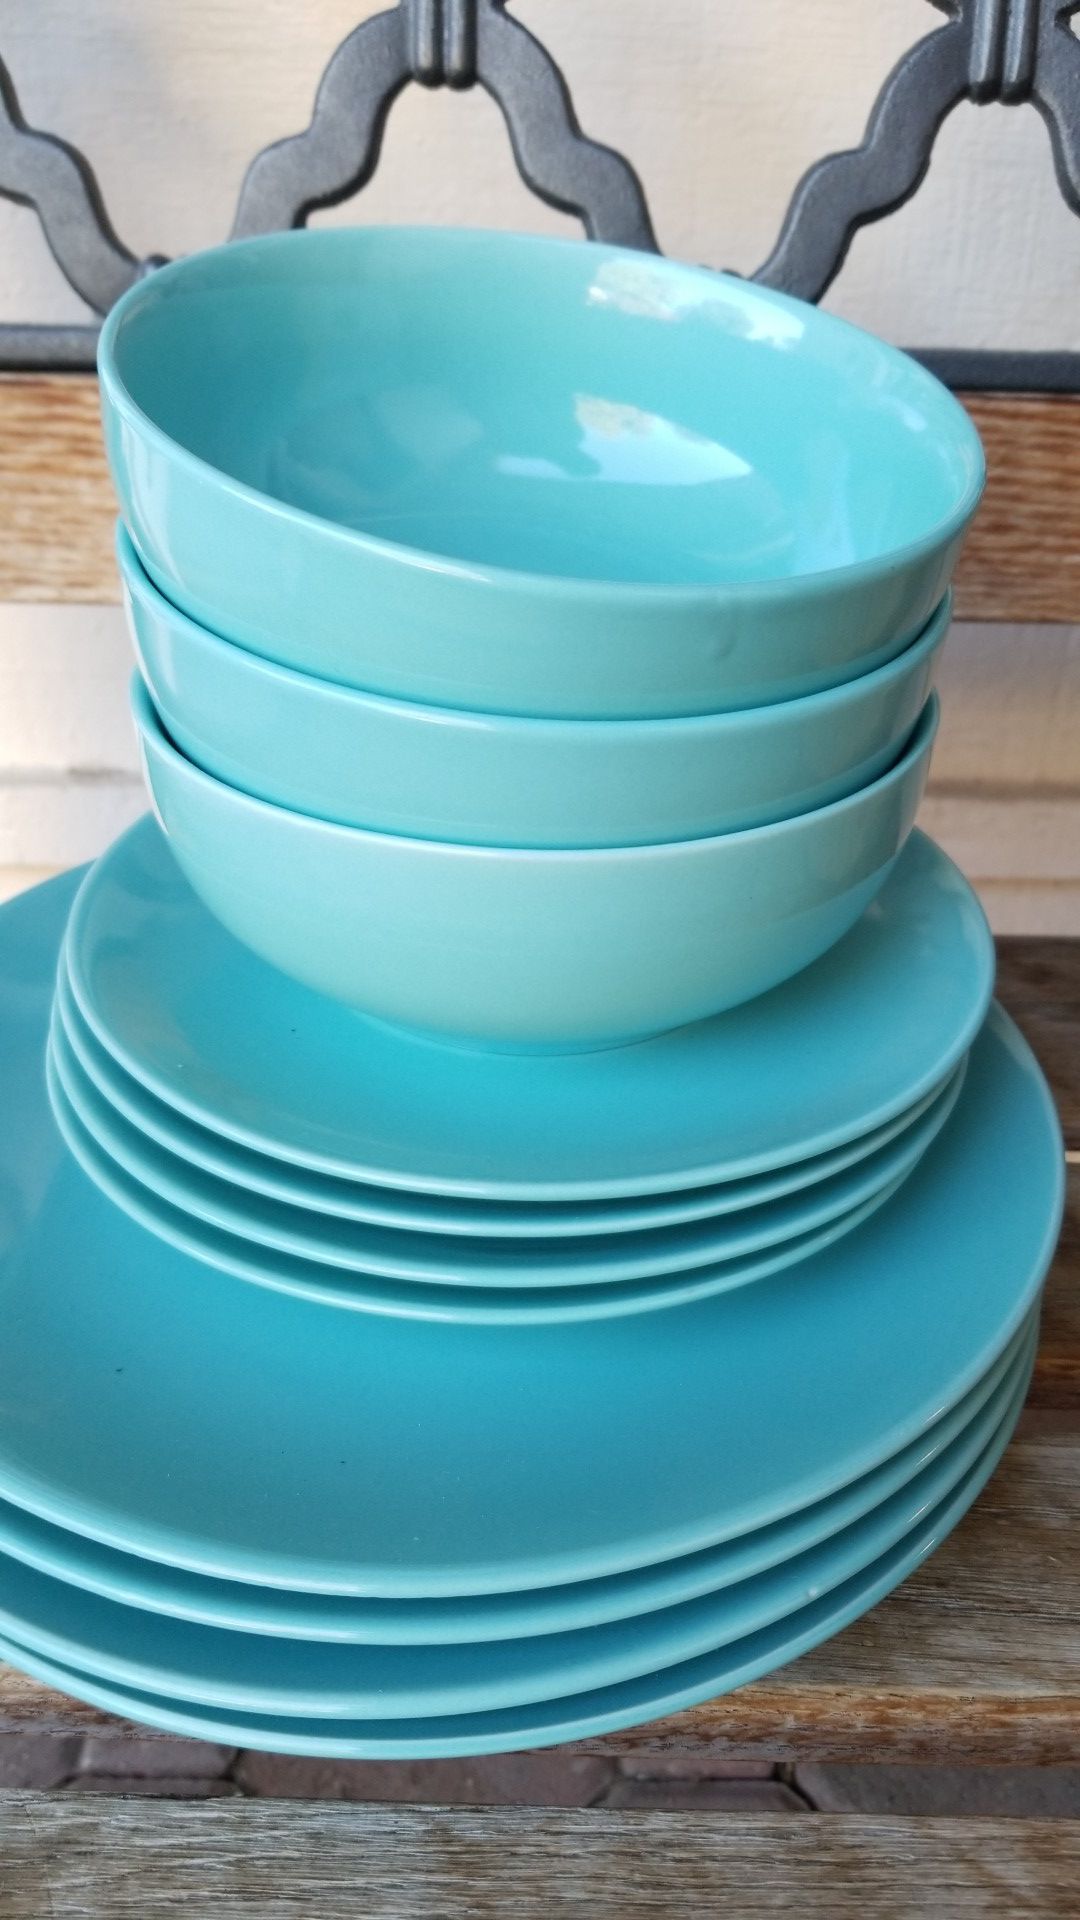 Dish set with odd number bowls